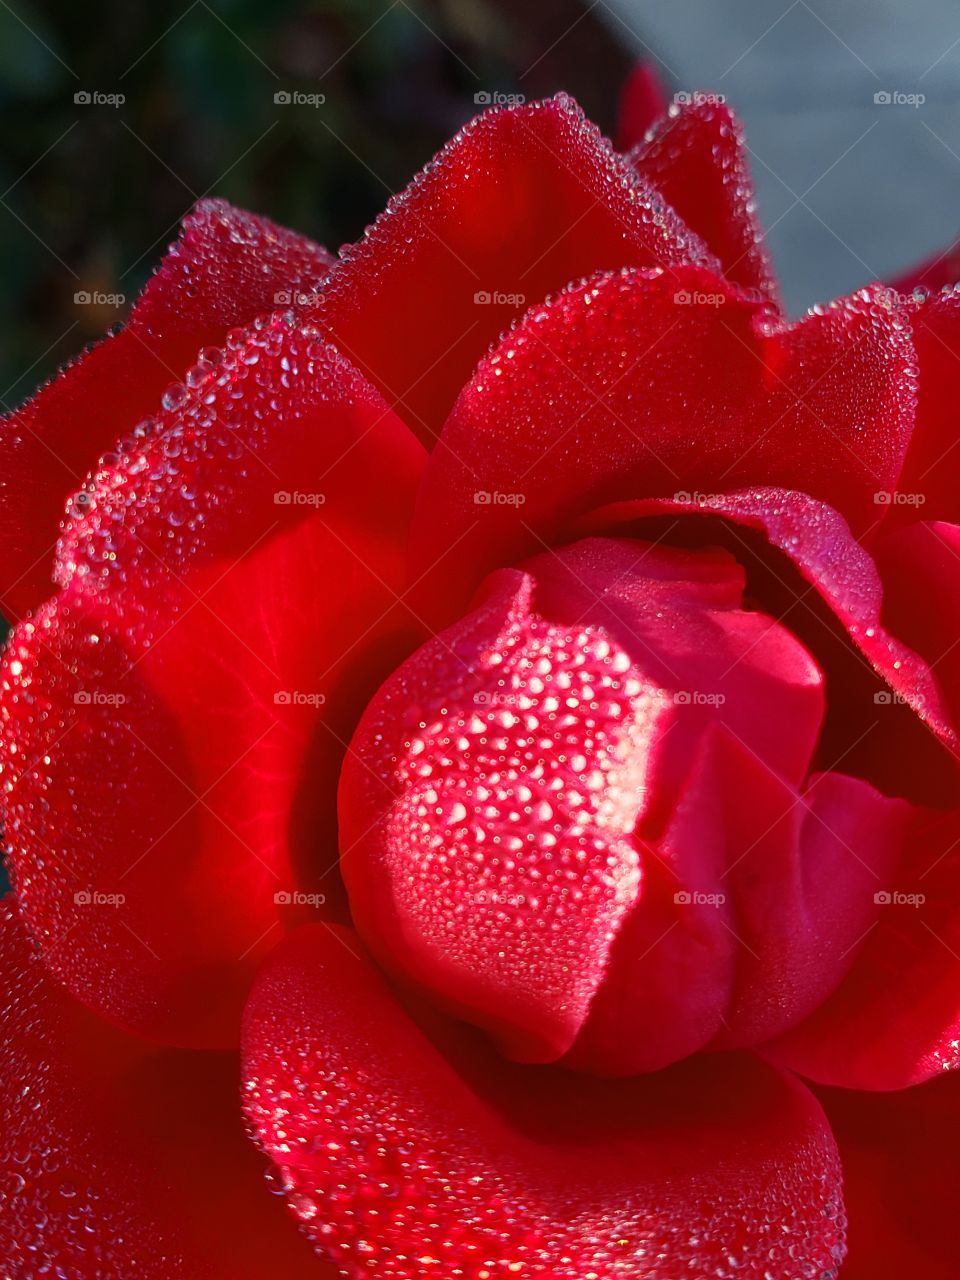 Morning dew on the rose